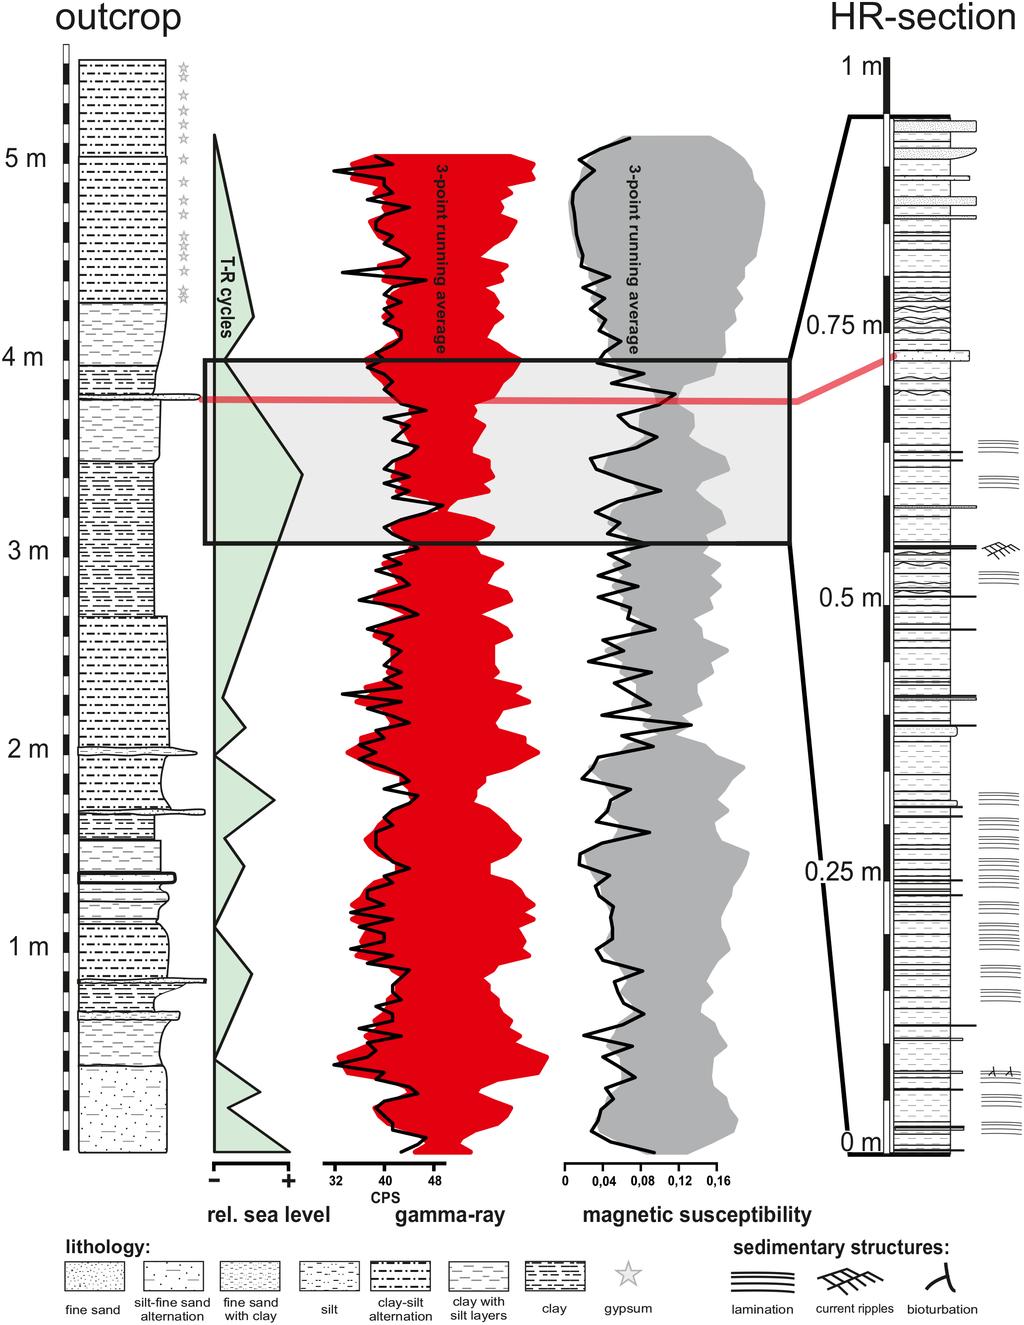 G. Auer et al.: Two distinct cyclicities forced upwelling and precipitation 287 Figure 3. Lithologs of the 5.5 m sedimentary succession and the high-resolution (HR) section.